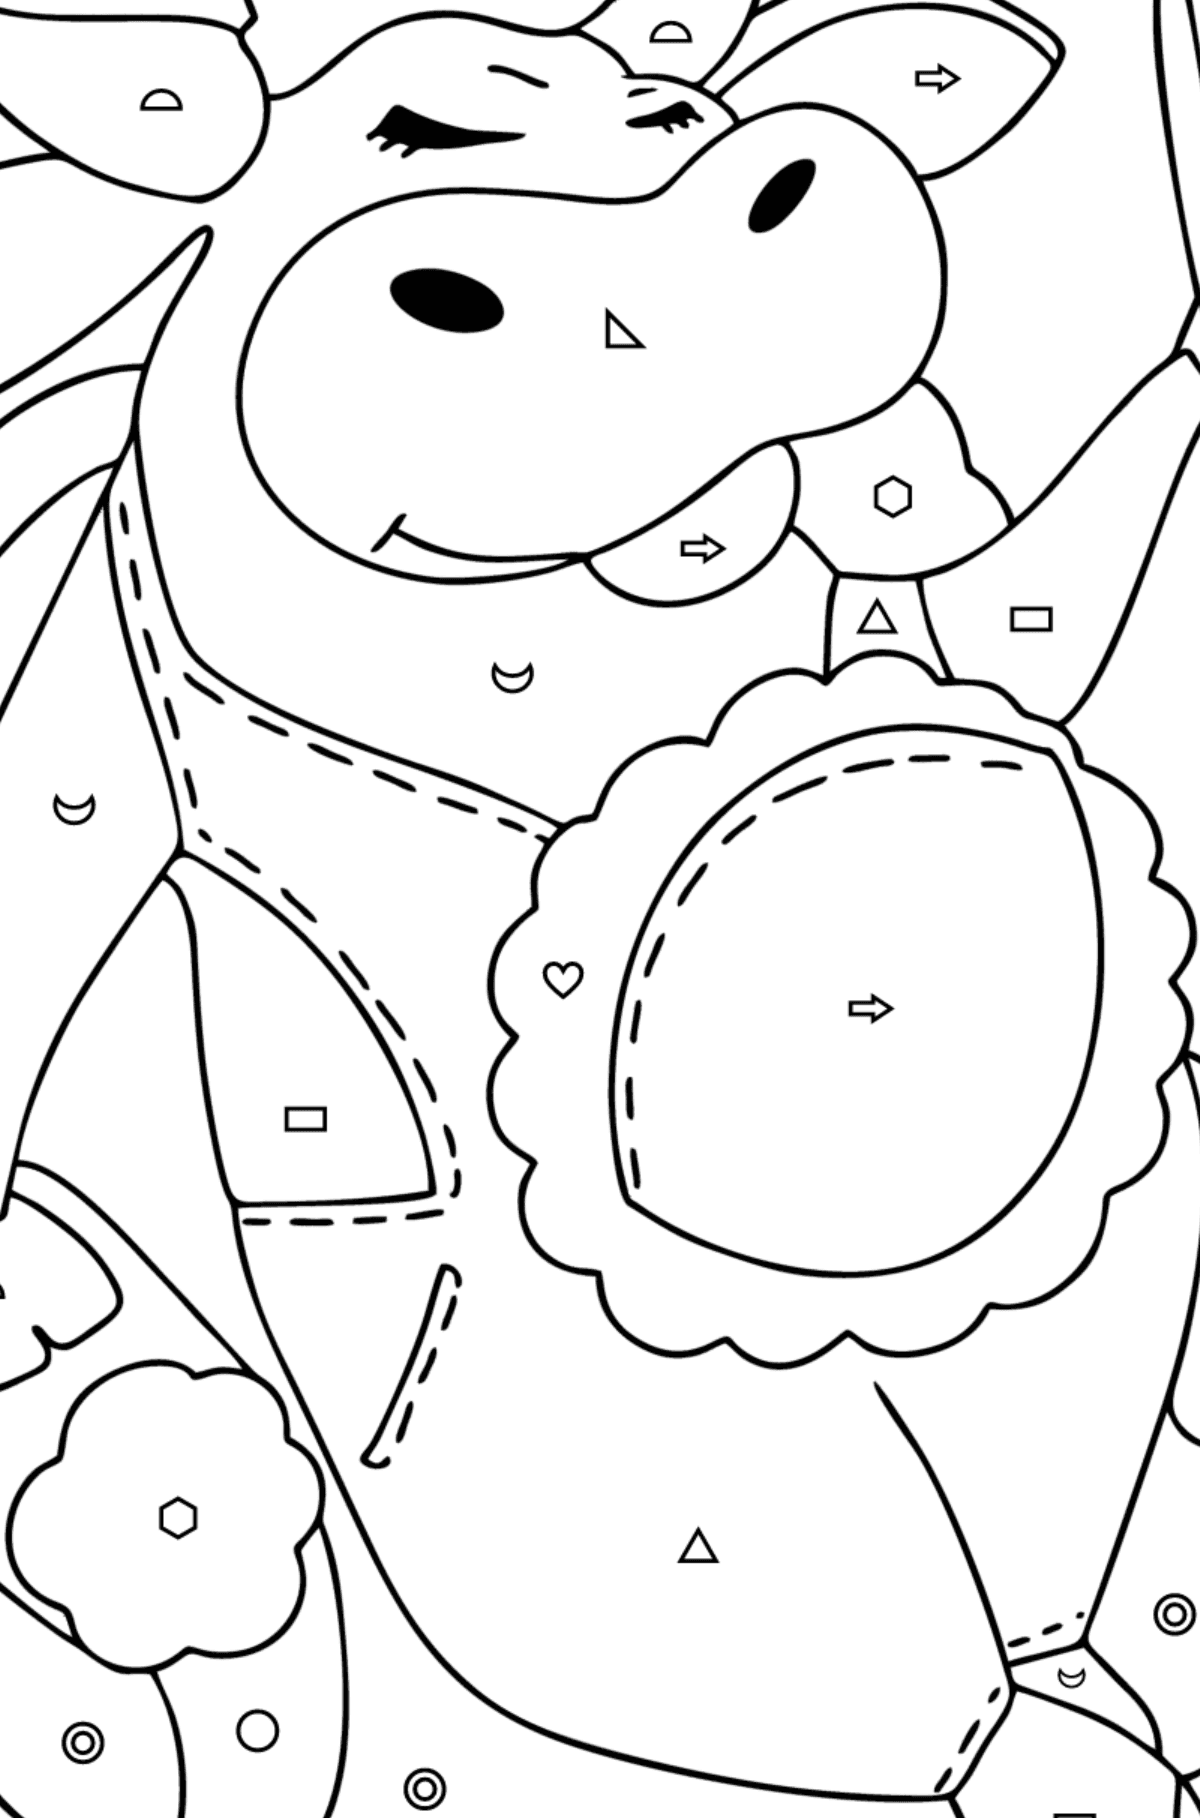 Funny cow coloring page - Coloring by Geometric Shapes for Kids